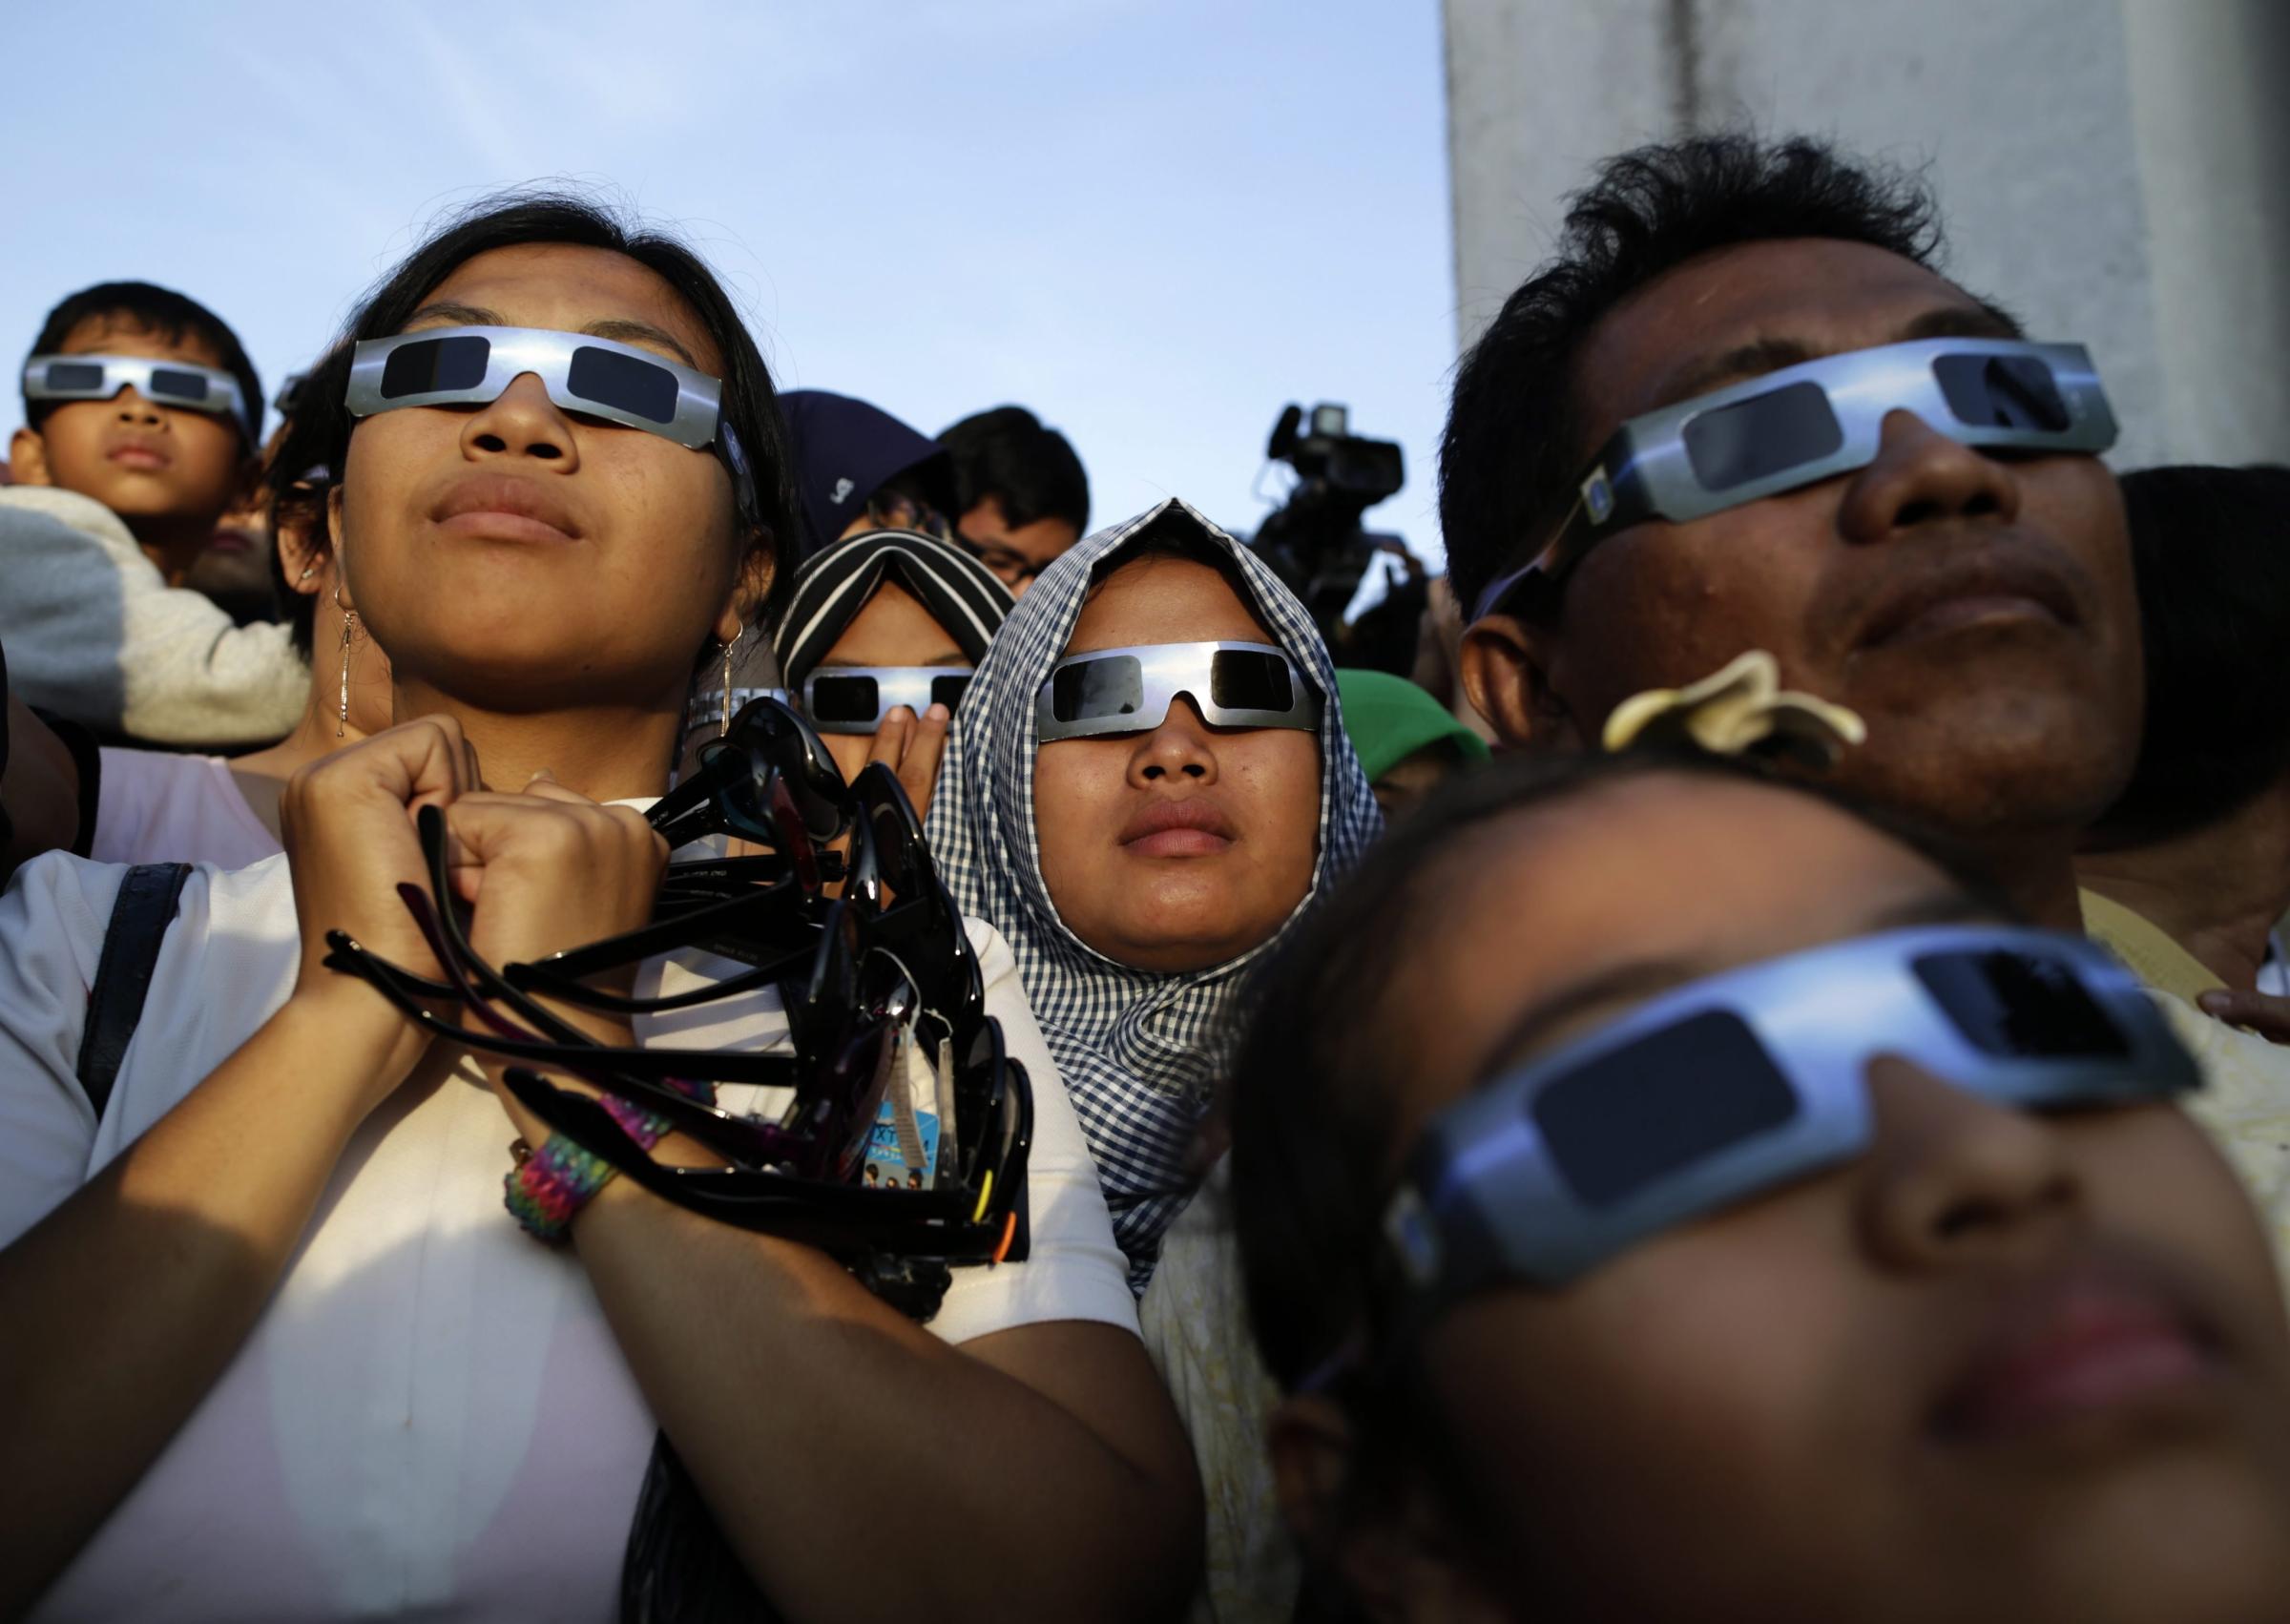 Indonesian residents wear eclipse glasses to watch a solar eclipse outside a planetarium in Jakarta, on March 9.